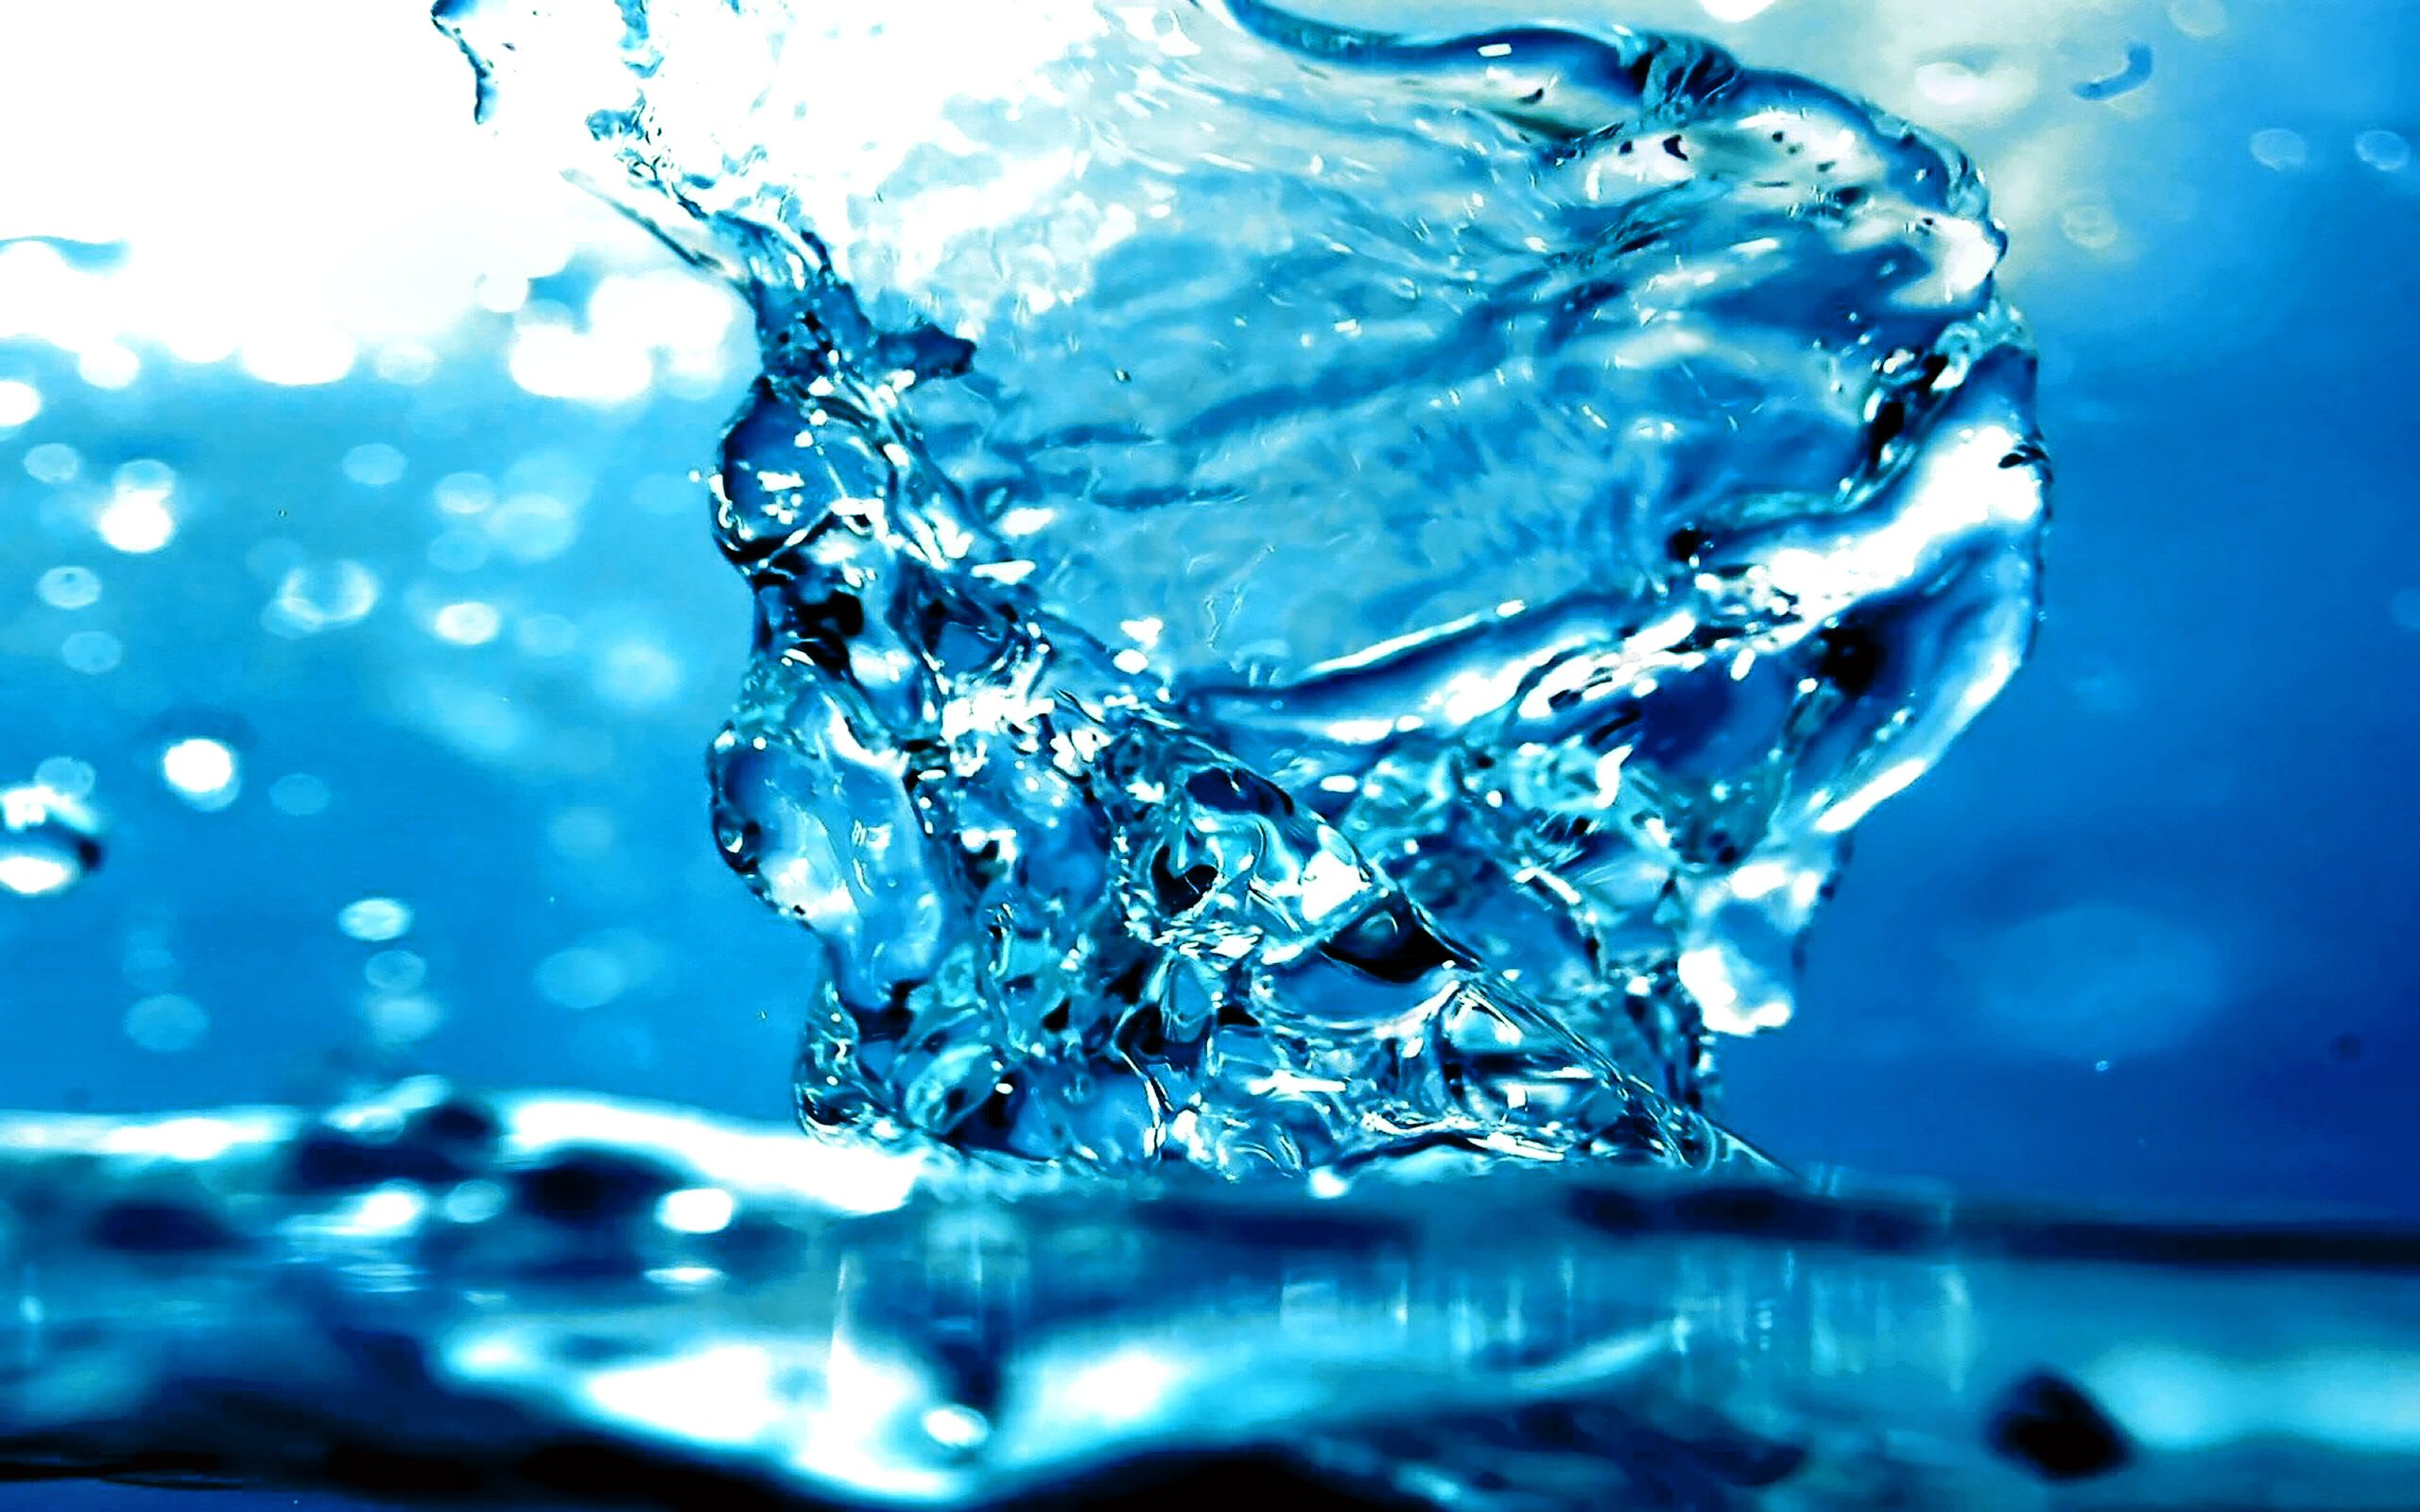 Water HD Wallpaper | Background Image | 2560x1600 | ID ...